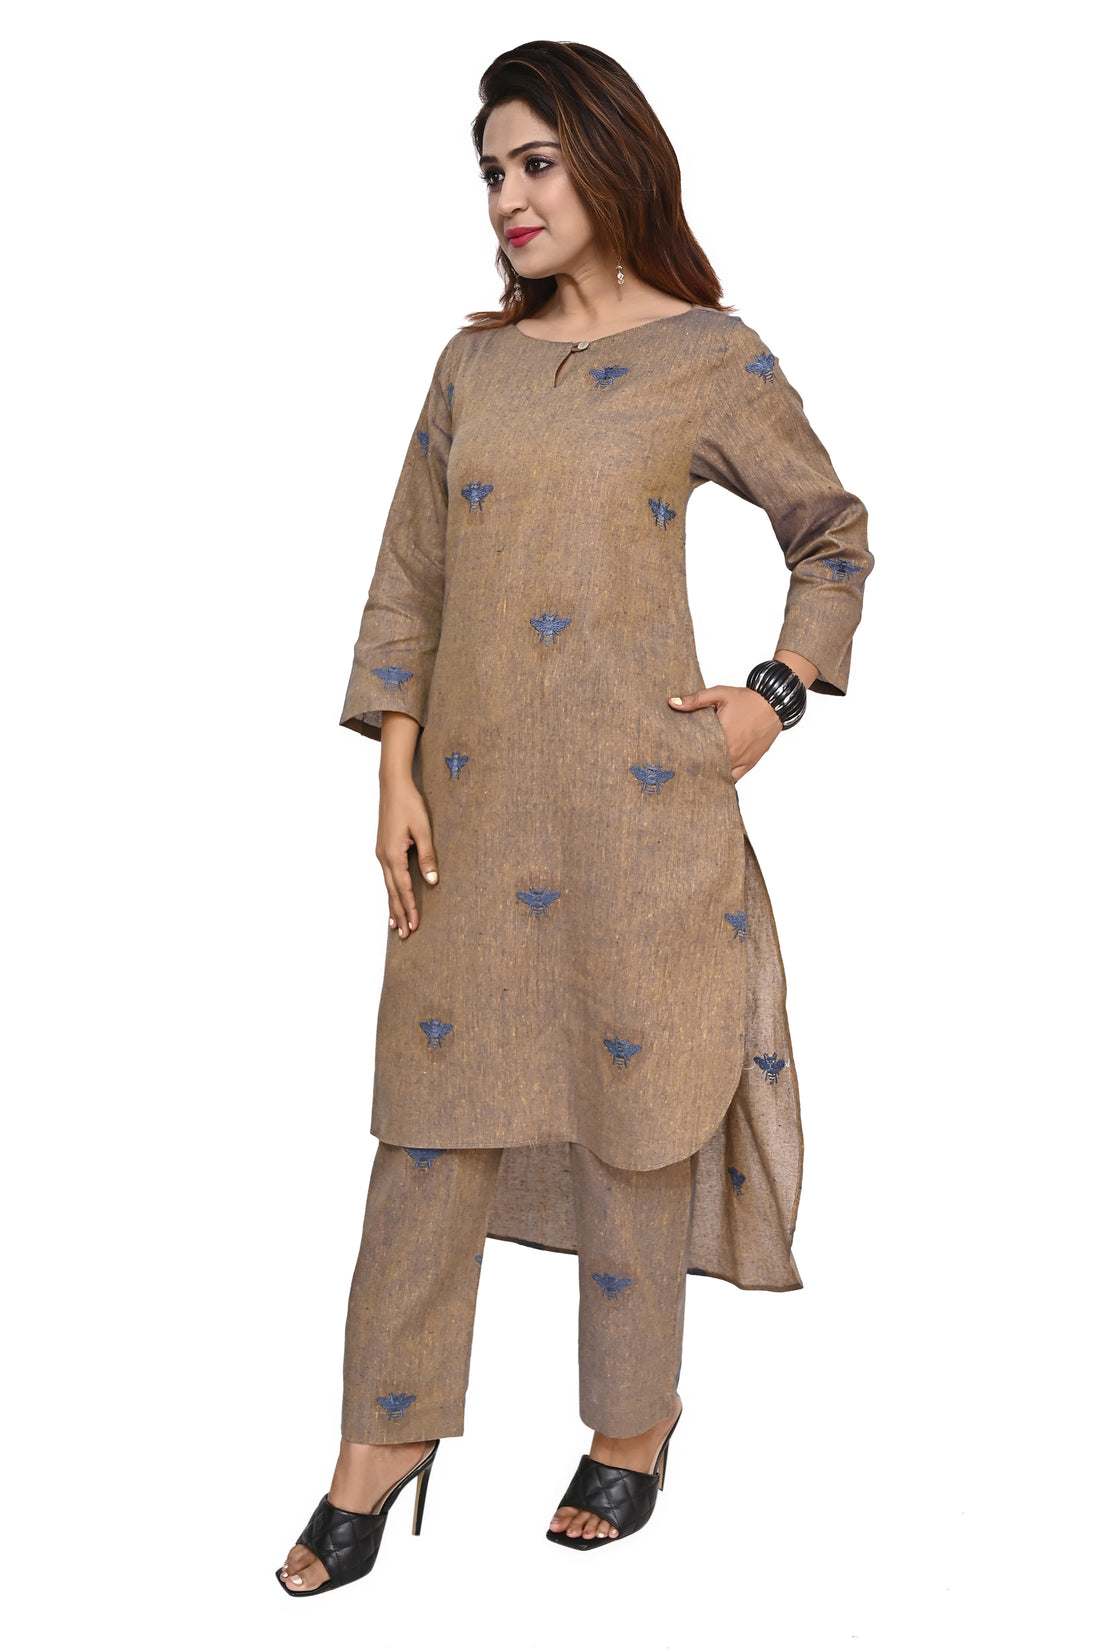 Nirmal online Premium cotton co-ord set kurti for Women in Brown colour with Honey bee embroidery